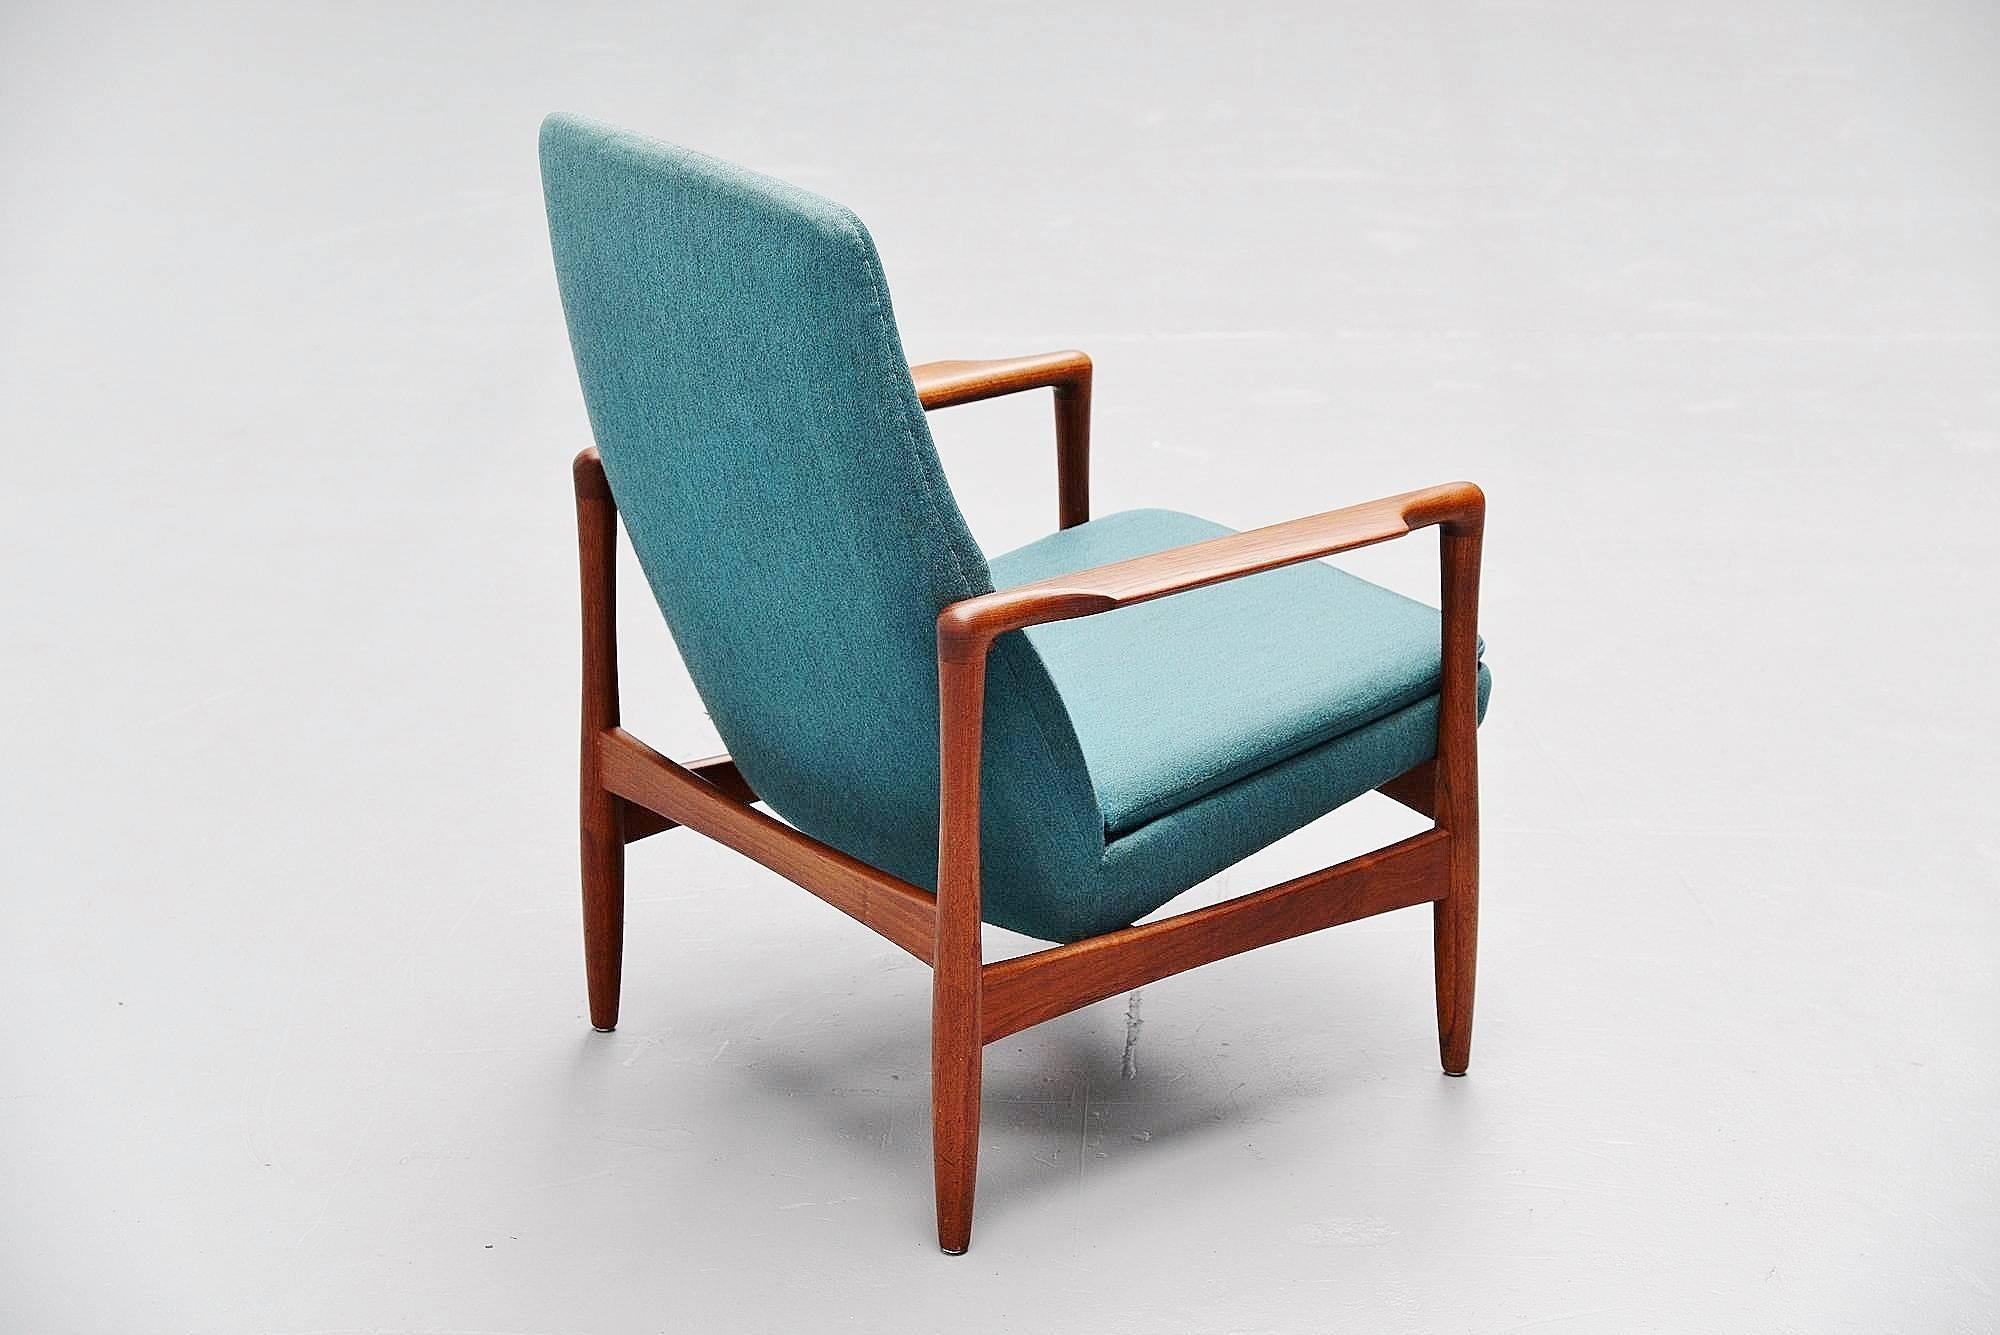 Rare easy chair designed by Ib Kofod Larsen for Selig Imports, Denmark, 1962. This chair has a solid teak wooden frame and original blue upholstery which was still in perfect condition. We just renewed the foam of the seating cushion as this was in